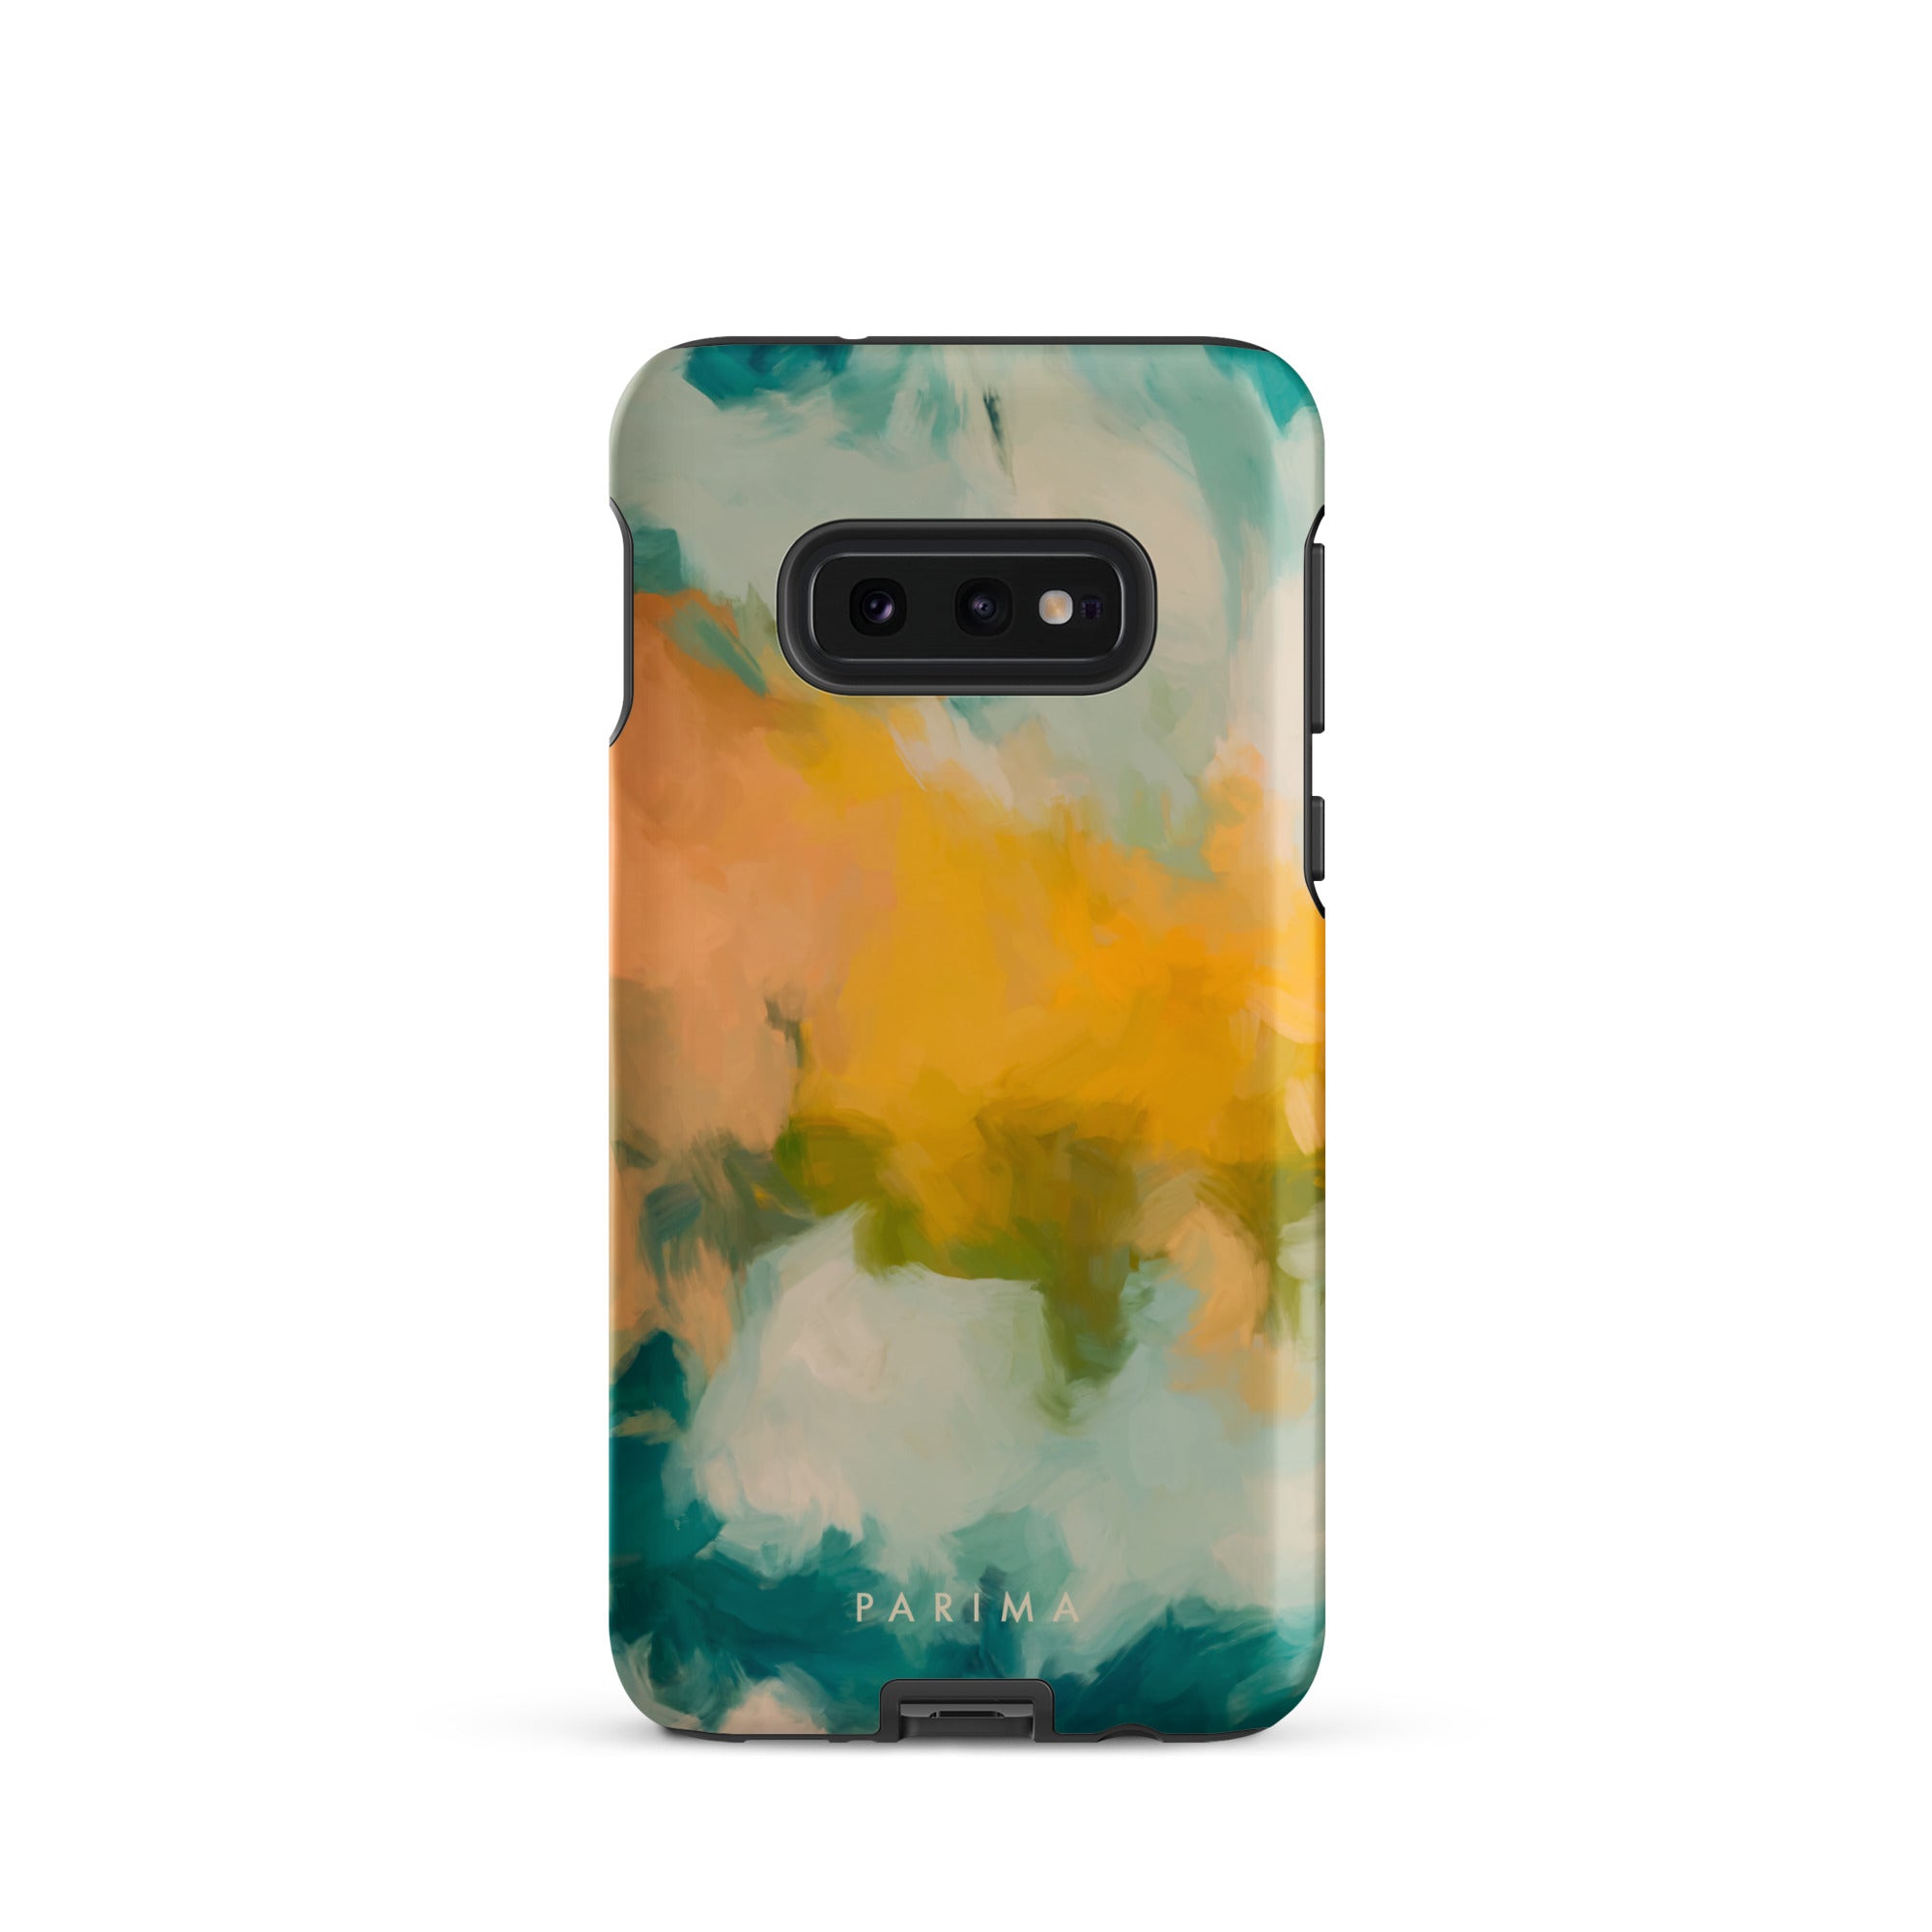 Beach Day, blue and yellow abstract art on Samsung Galaxy S10e tough case by Parima Studio